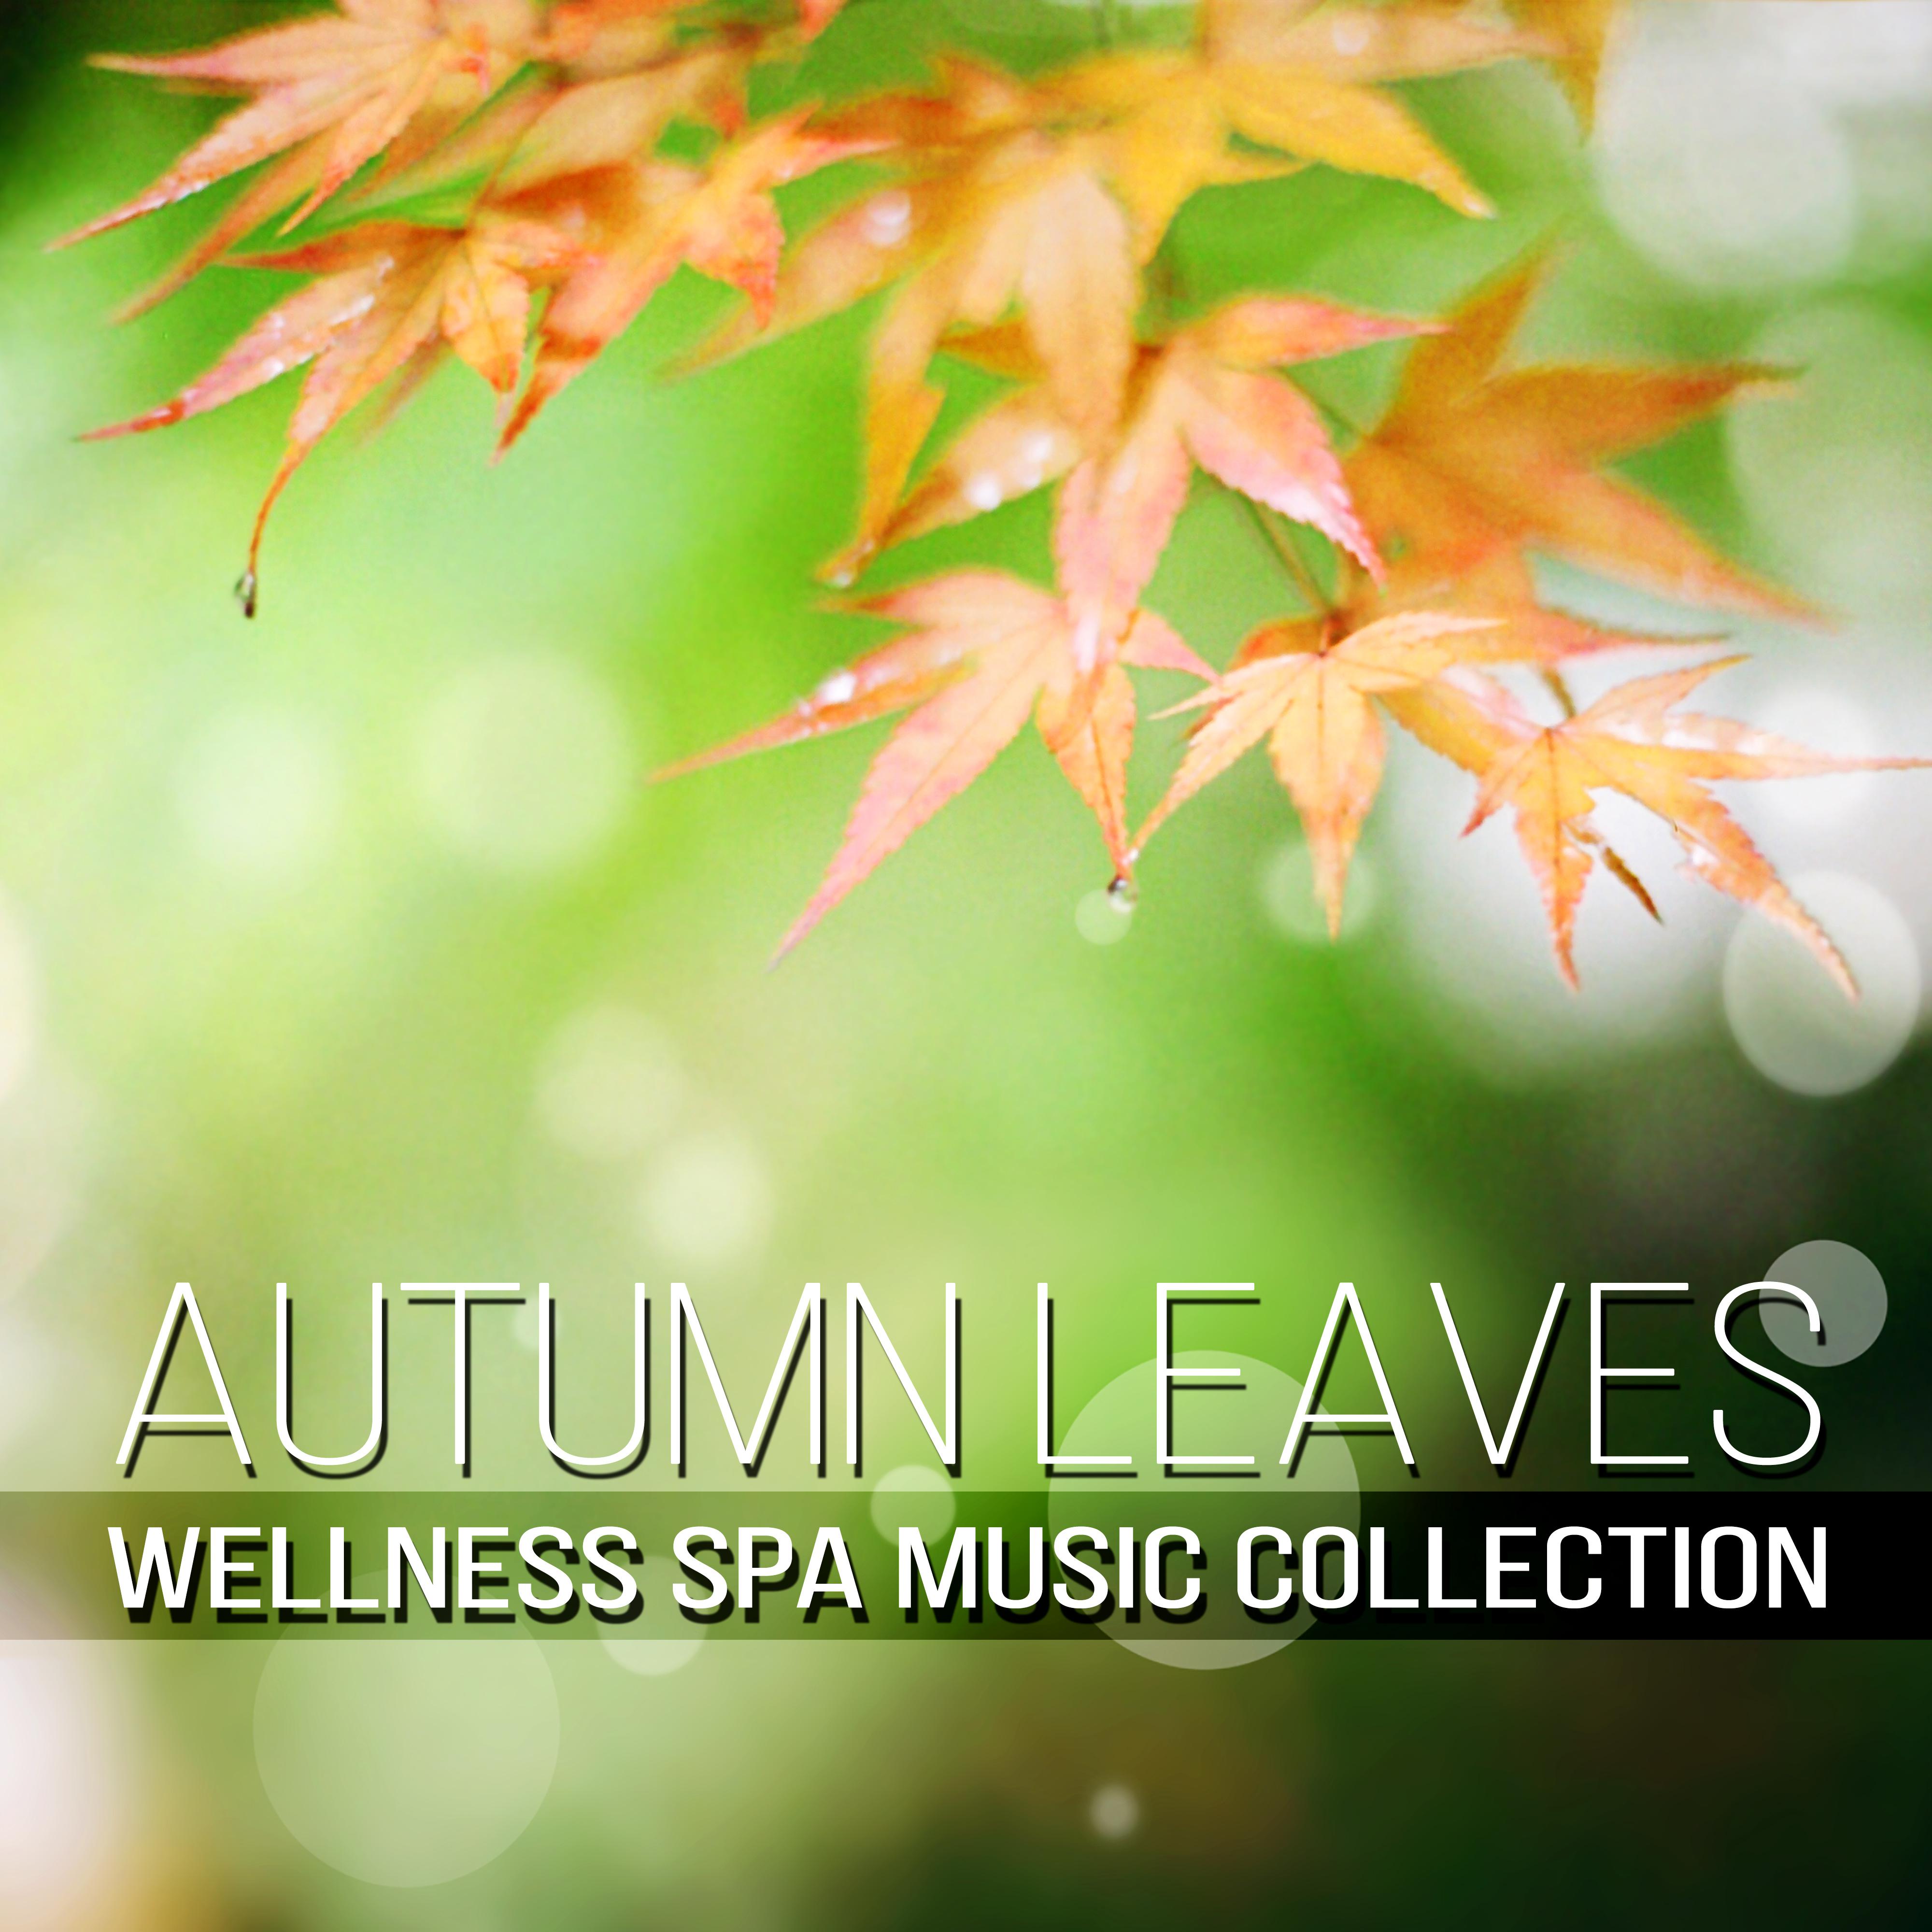 Autumn Leaves - Wellness Spa Music Collection, Soothing Sounds for Serenity Spa, Total Relax and Wellbeing